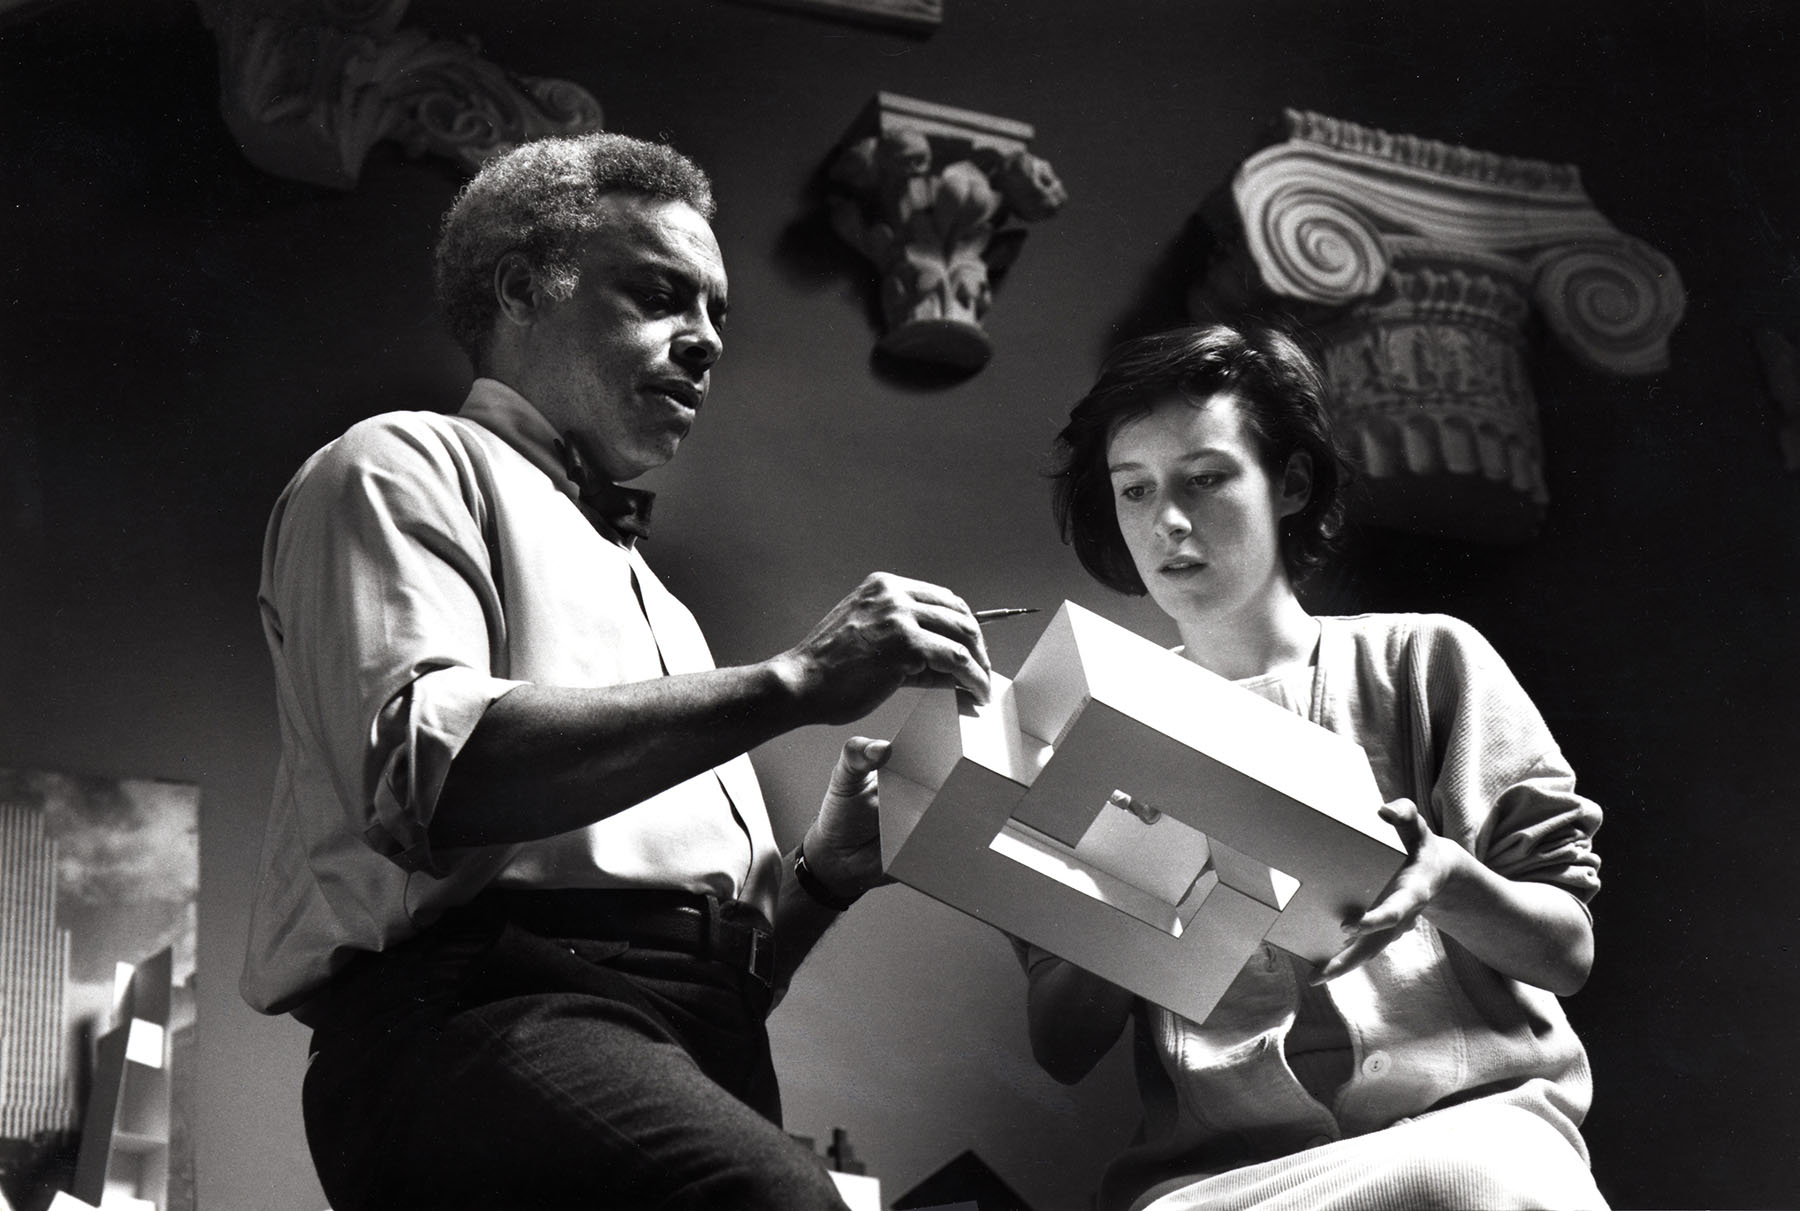 Architect  Jeh Vincent Johnson and a student holding a model